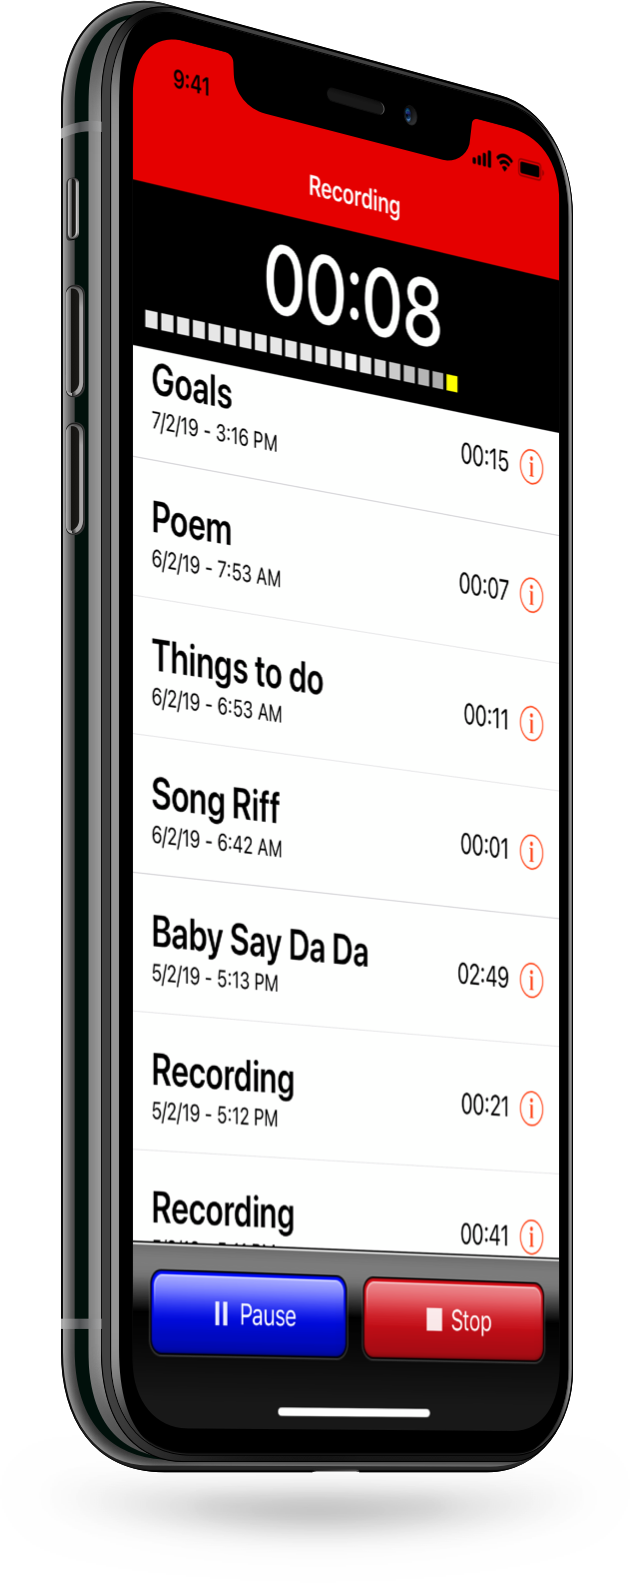 iRecorder - Recorder for iPhone, iPod touch